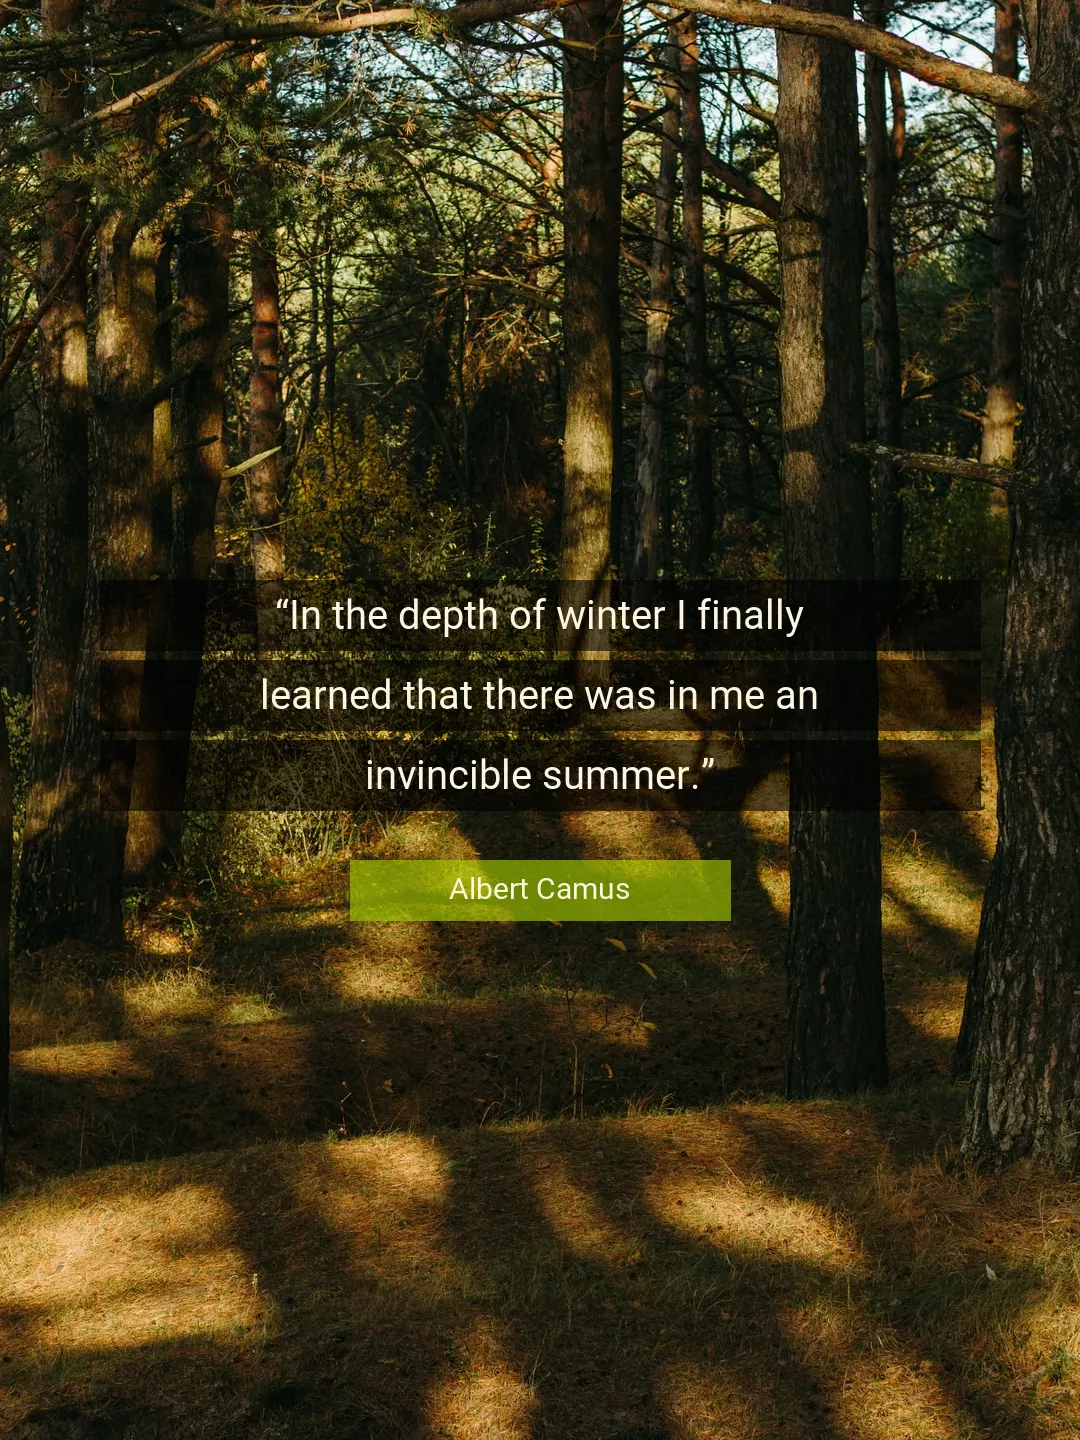 Quote About Nature By Albert Camus